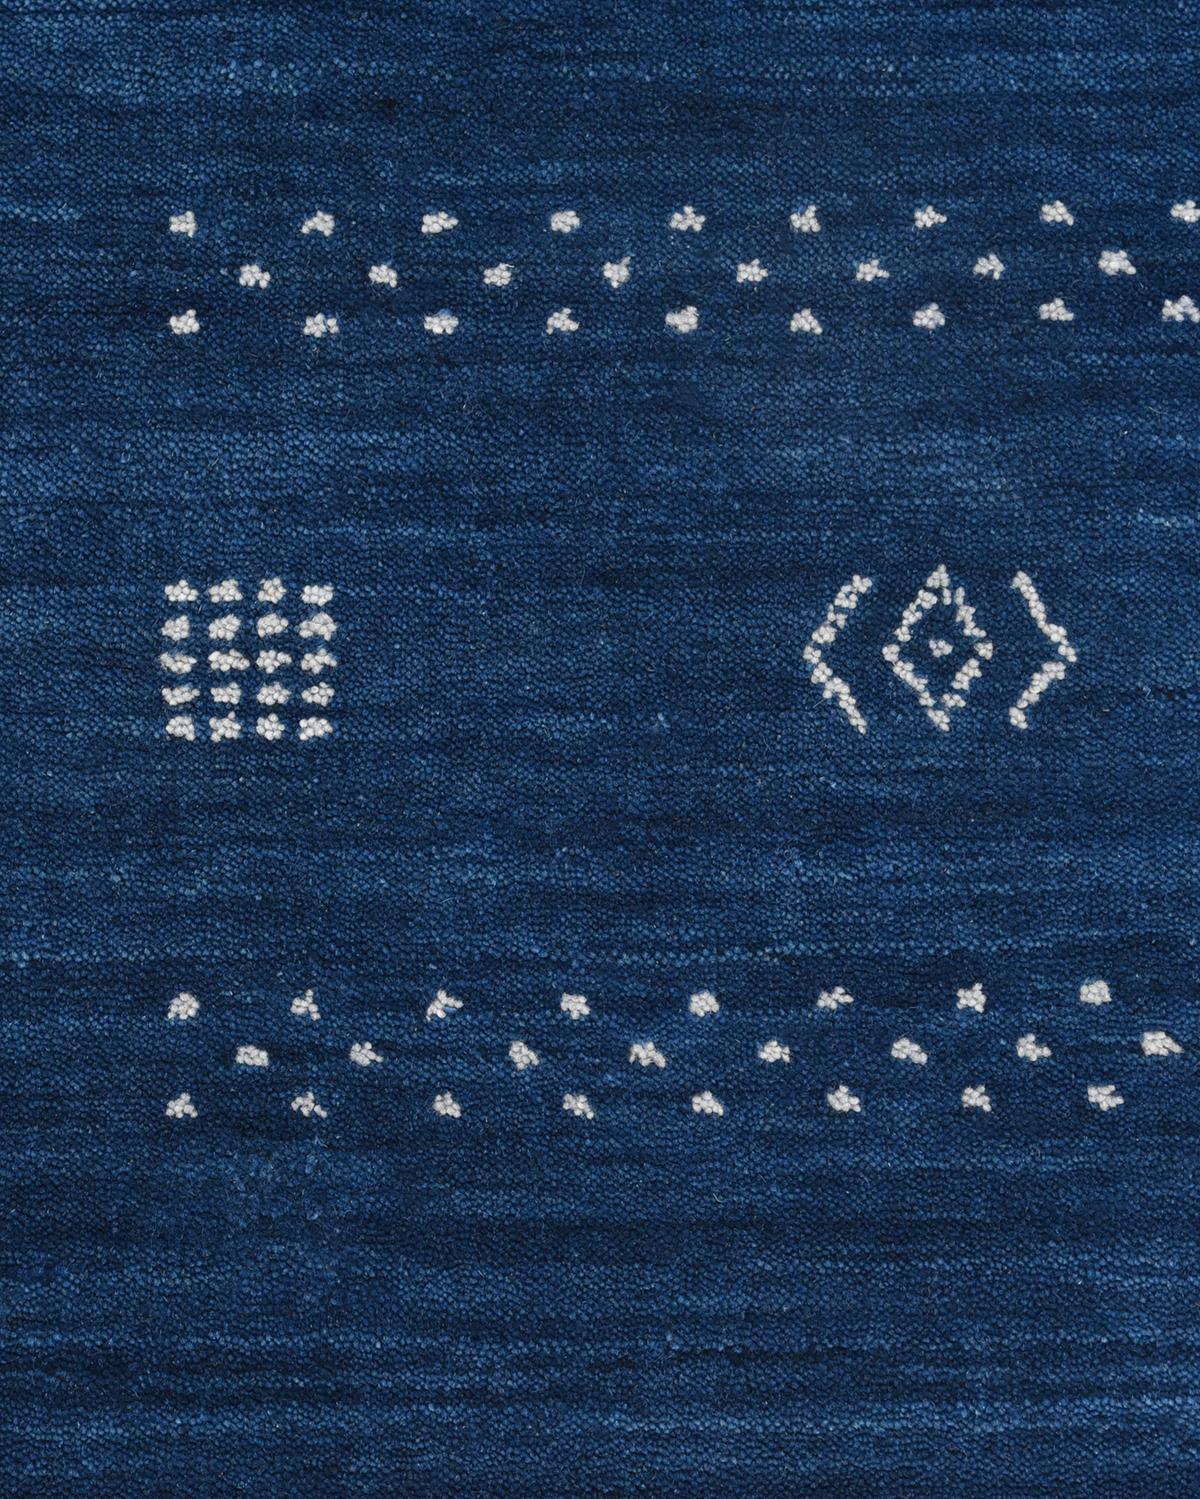 Indian Solo Rugs Gabbeh Tribal Hand Loom Blue Area Rug For Sale